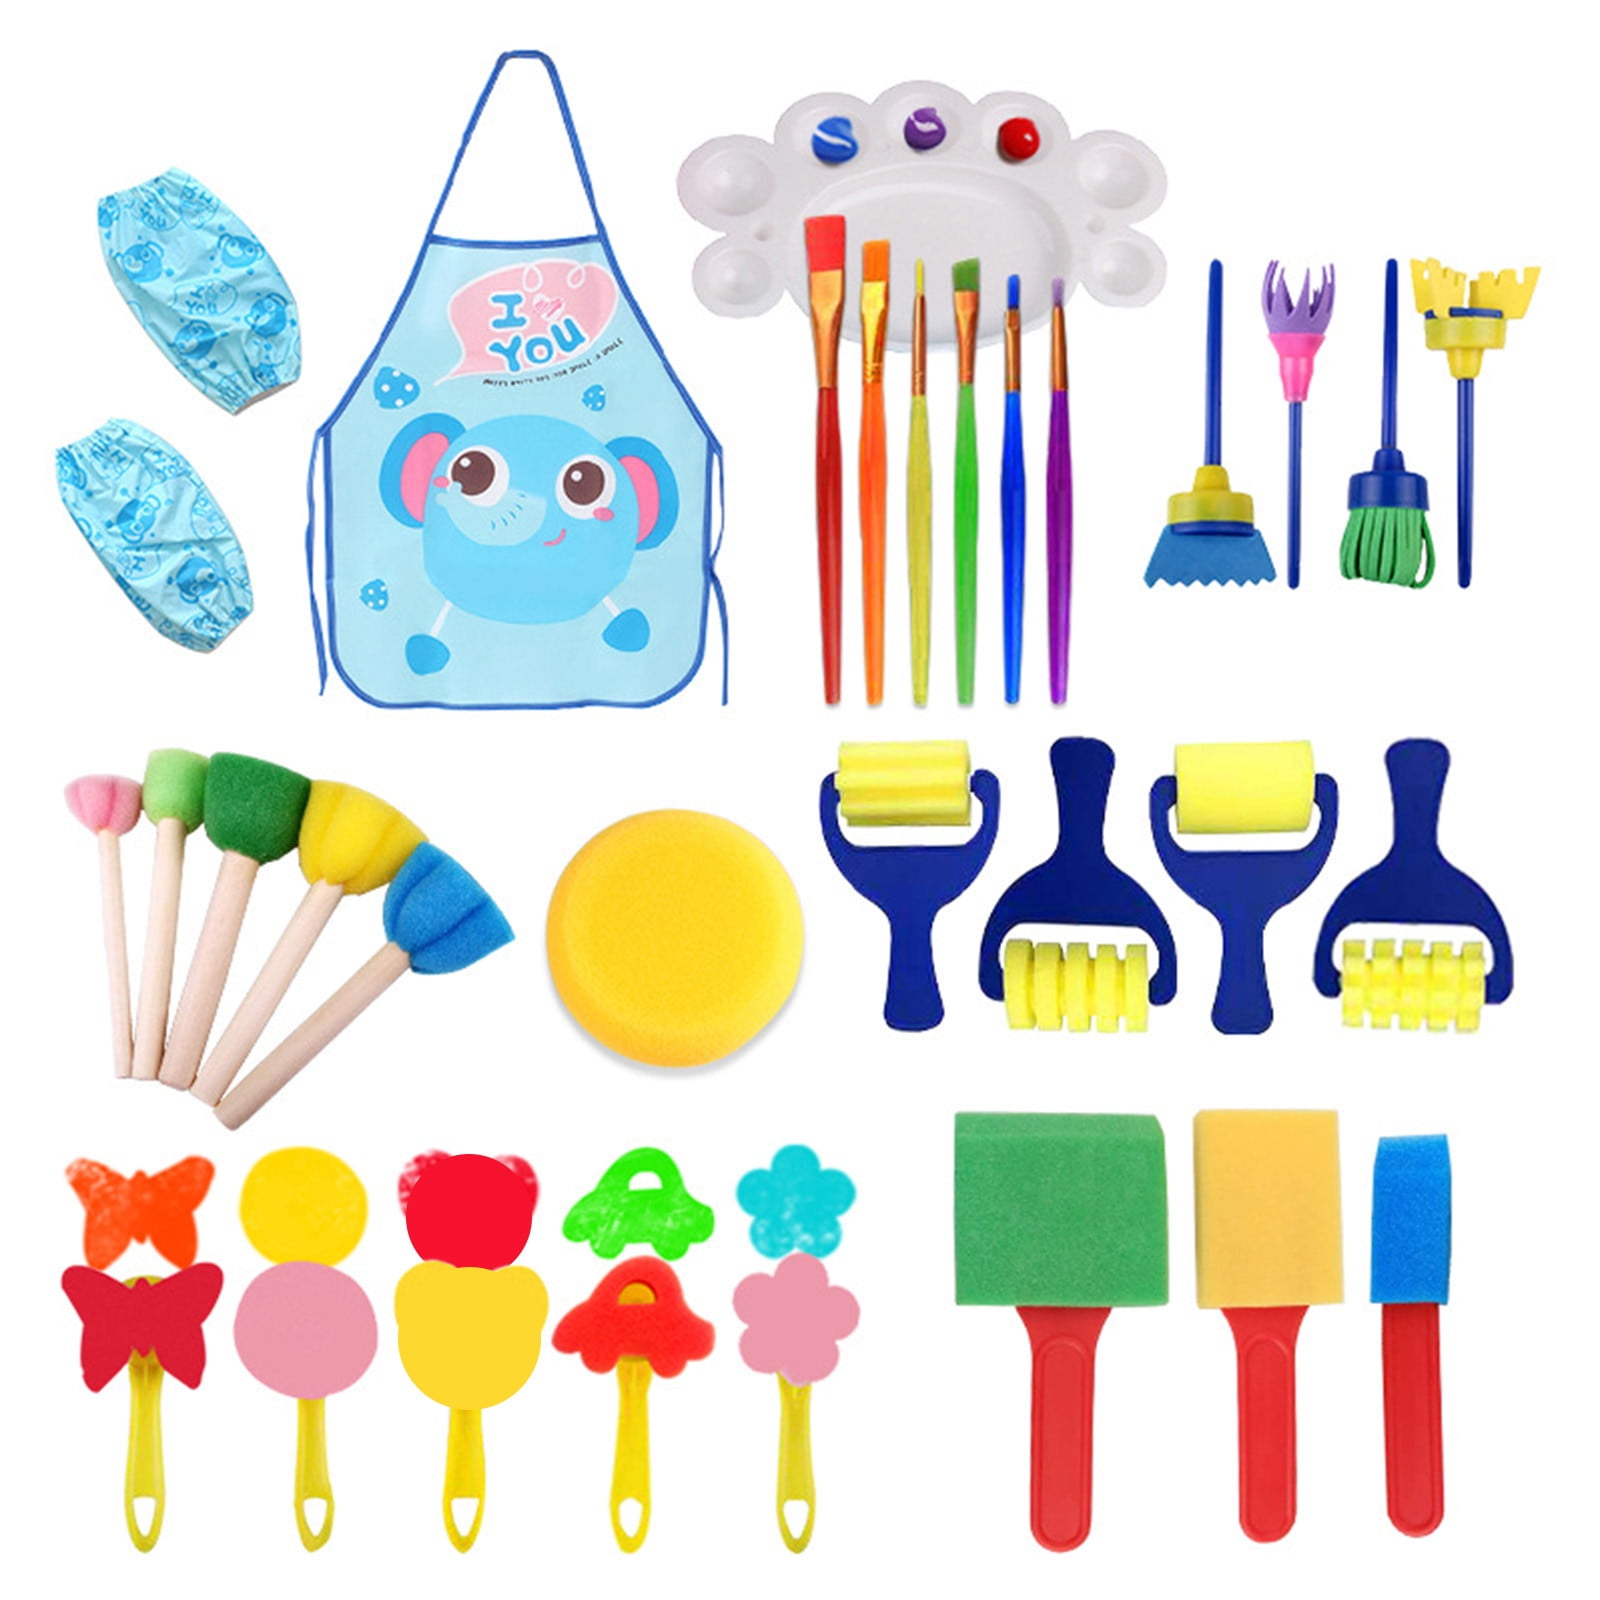 Yansion 1000pcs DIY Arts and Crafts Supplies Craft Art Supply Kit, D.I.Y. Crafting Collage Arts Set for Kids Toddlers Age 3+, Educational Toy Set for